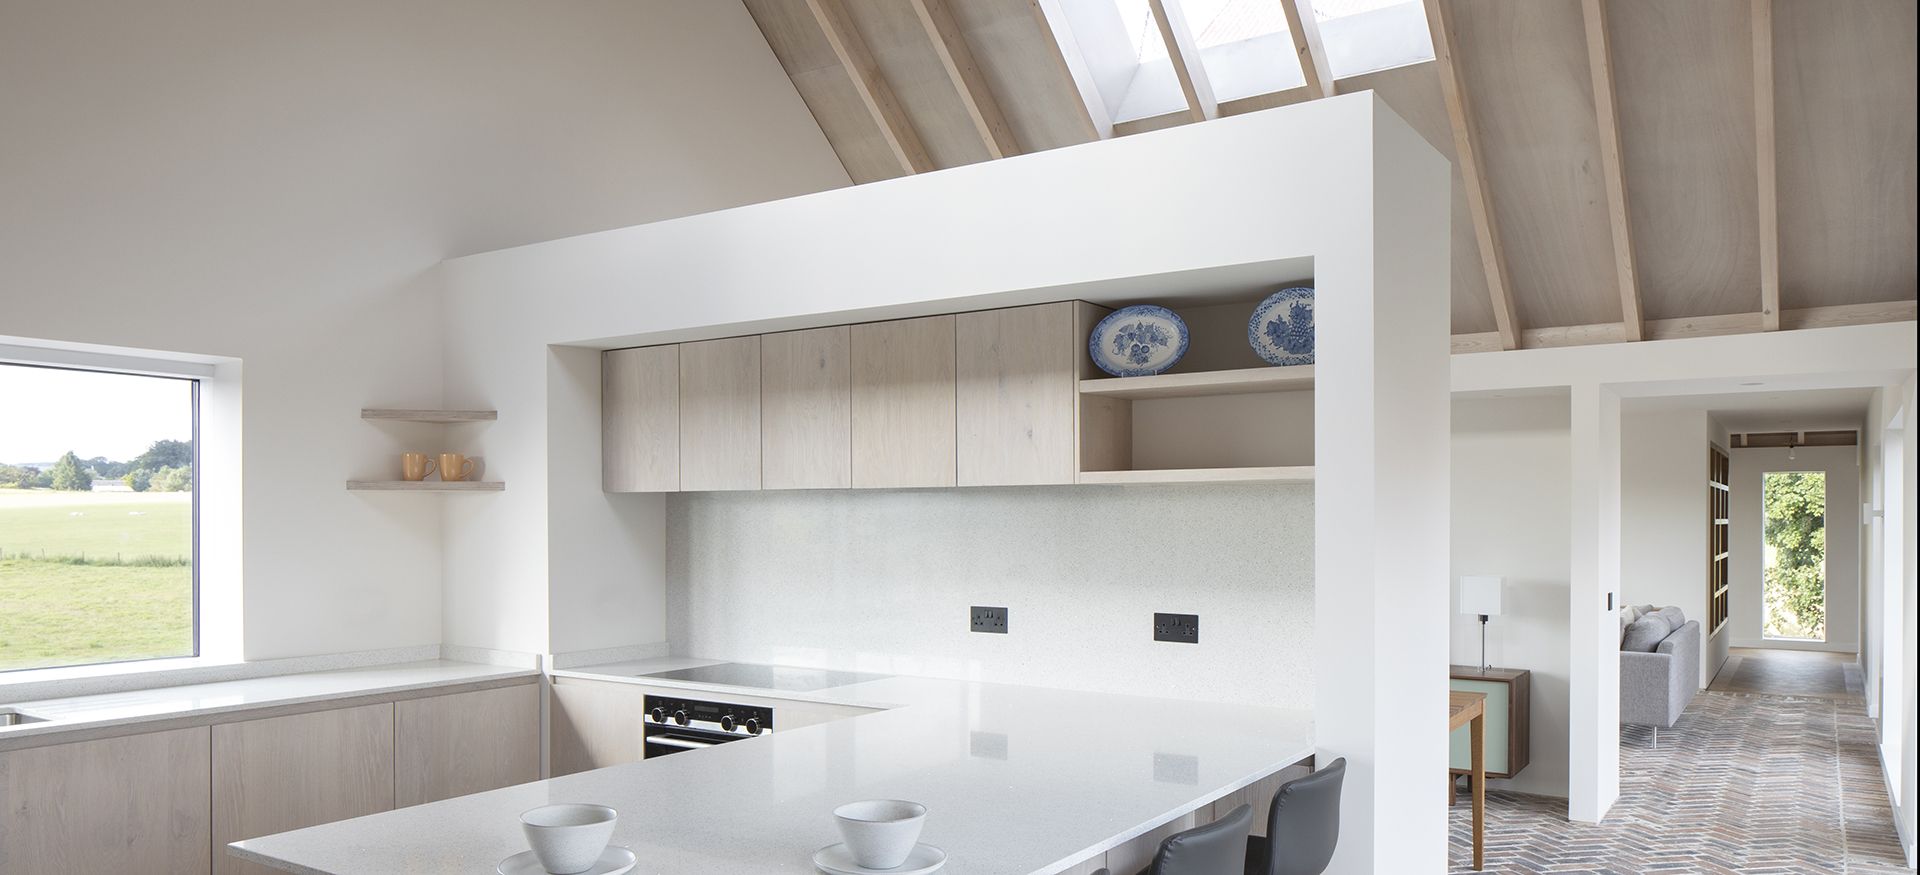 A kitchen that moulds into the rest of the interior